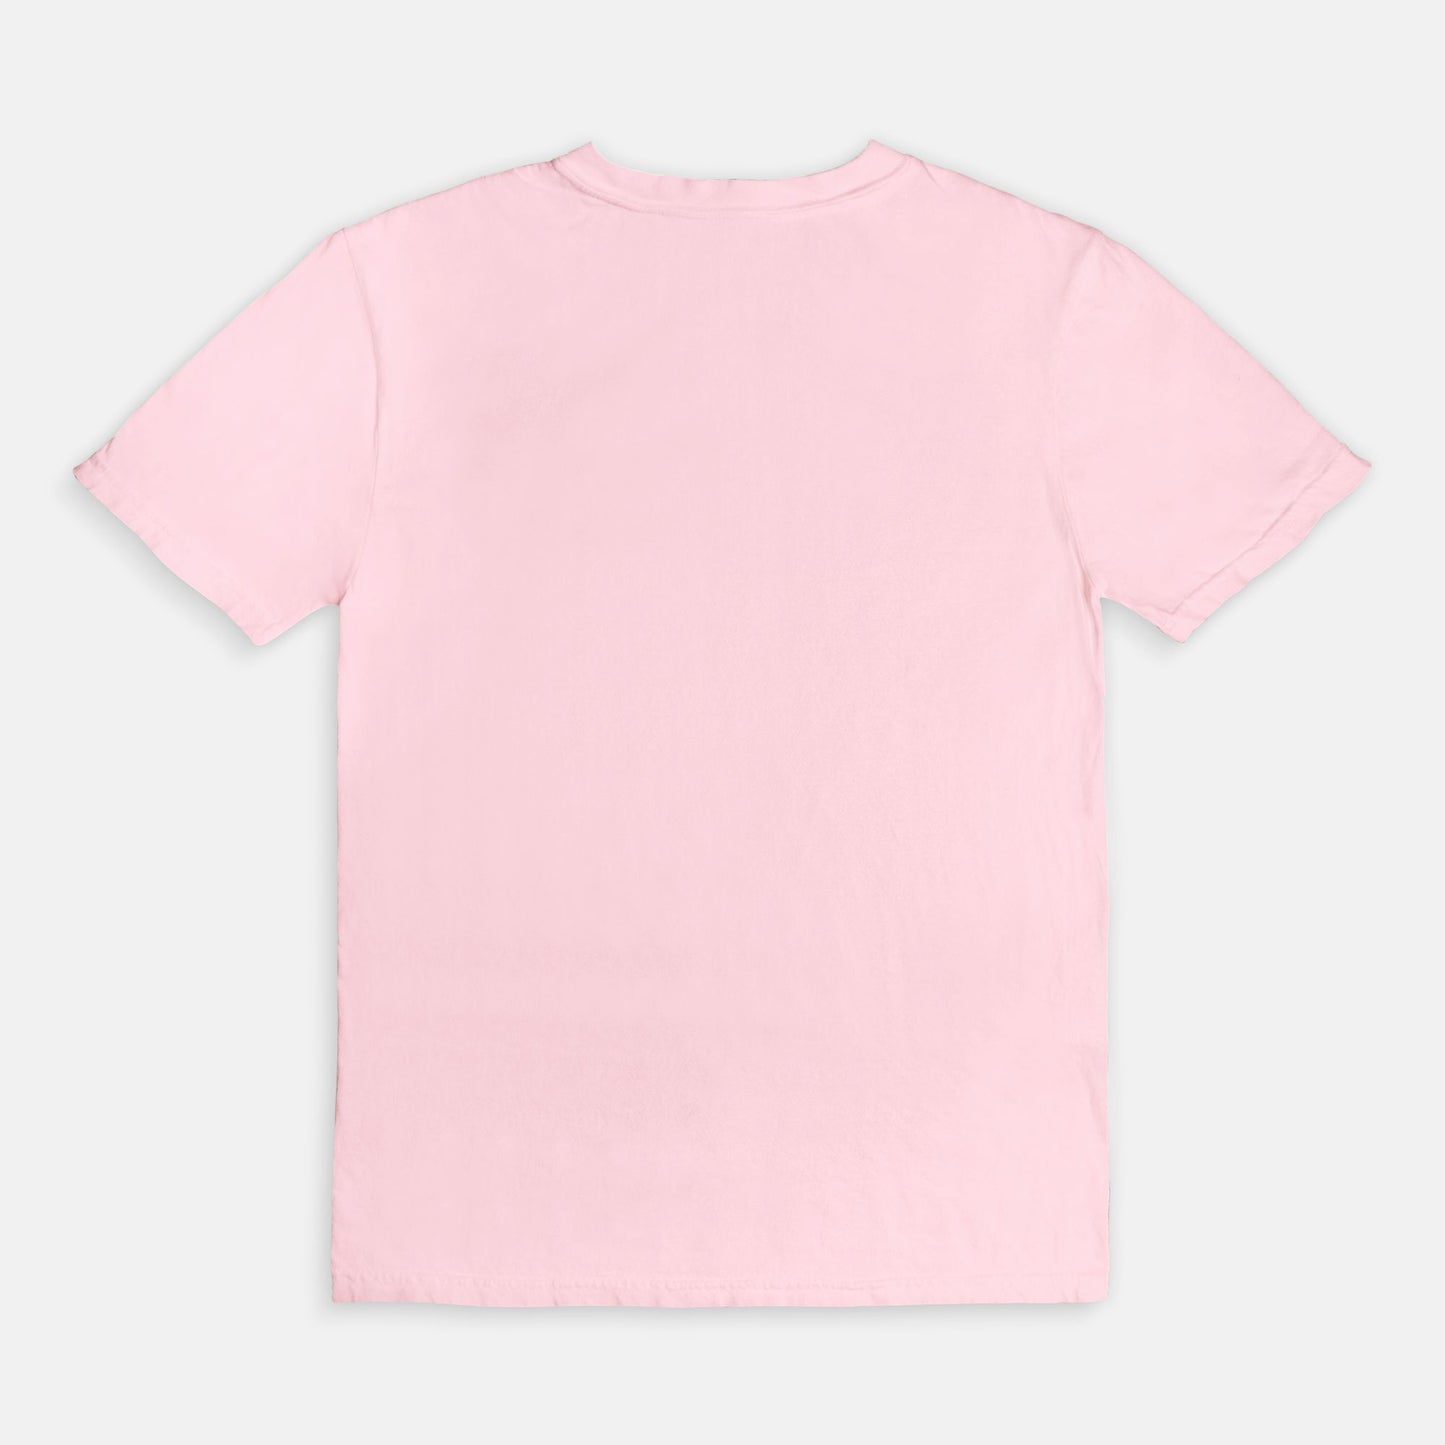 I Ghost People Year-Round Comfort Color Tee